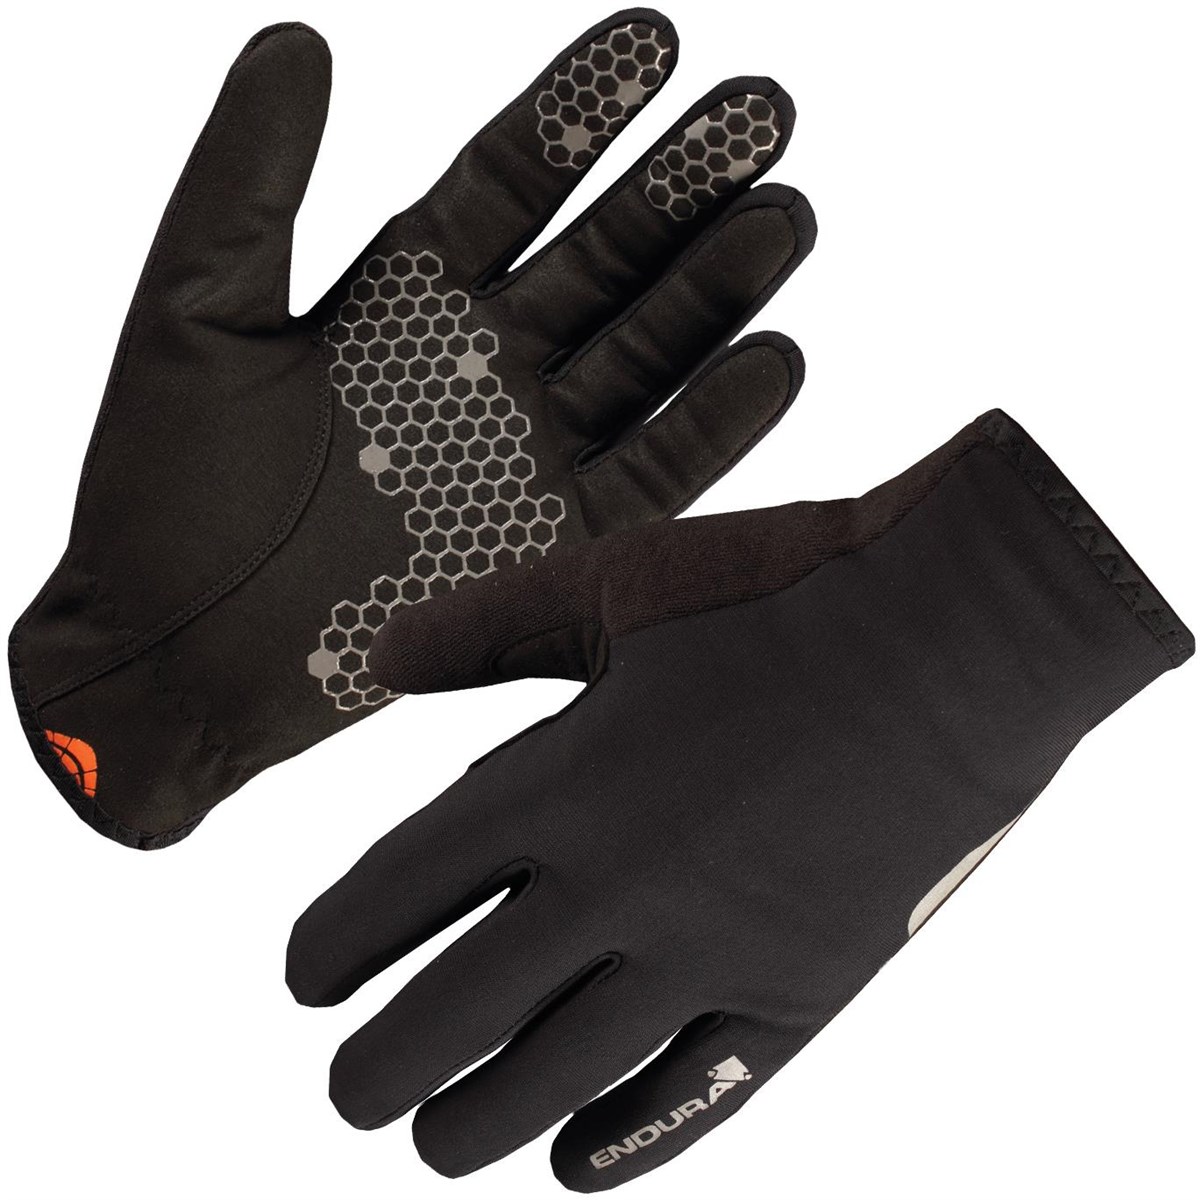 Endura Thermolite Roubaix Full Finger Cycling Gloves product image